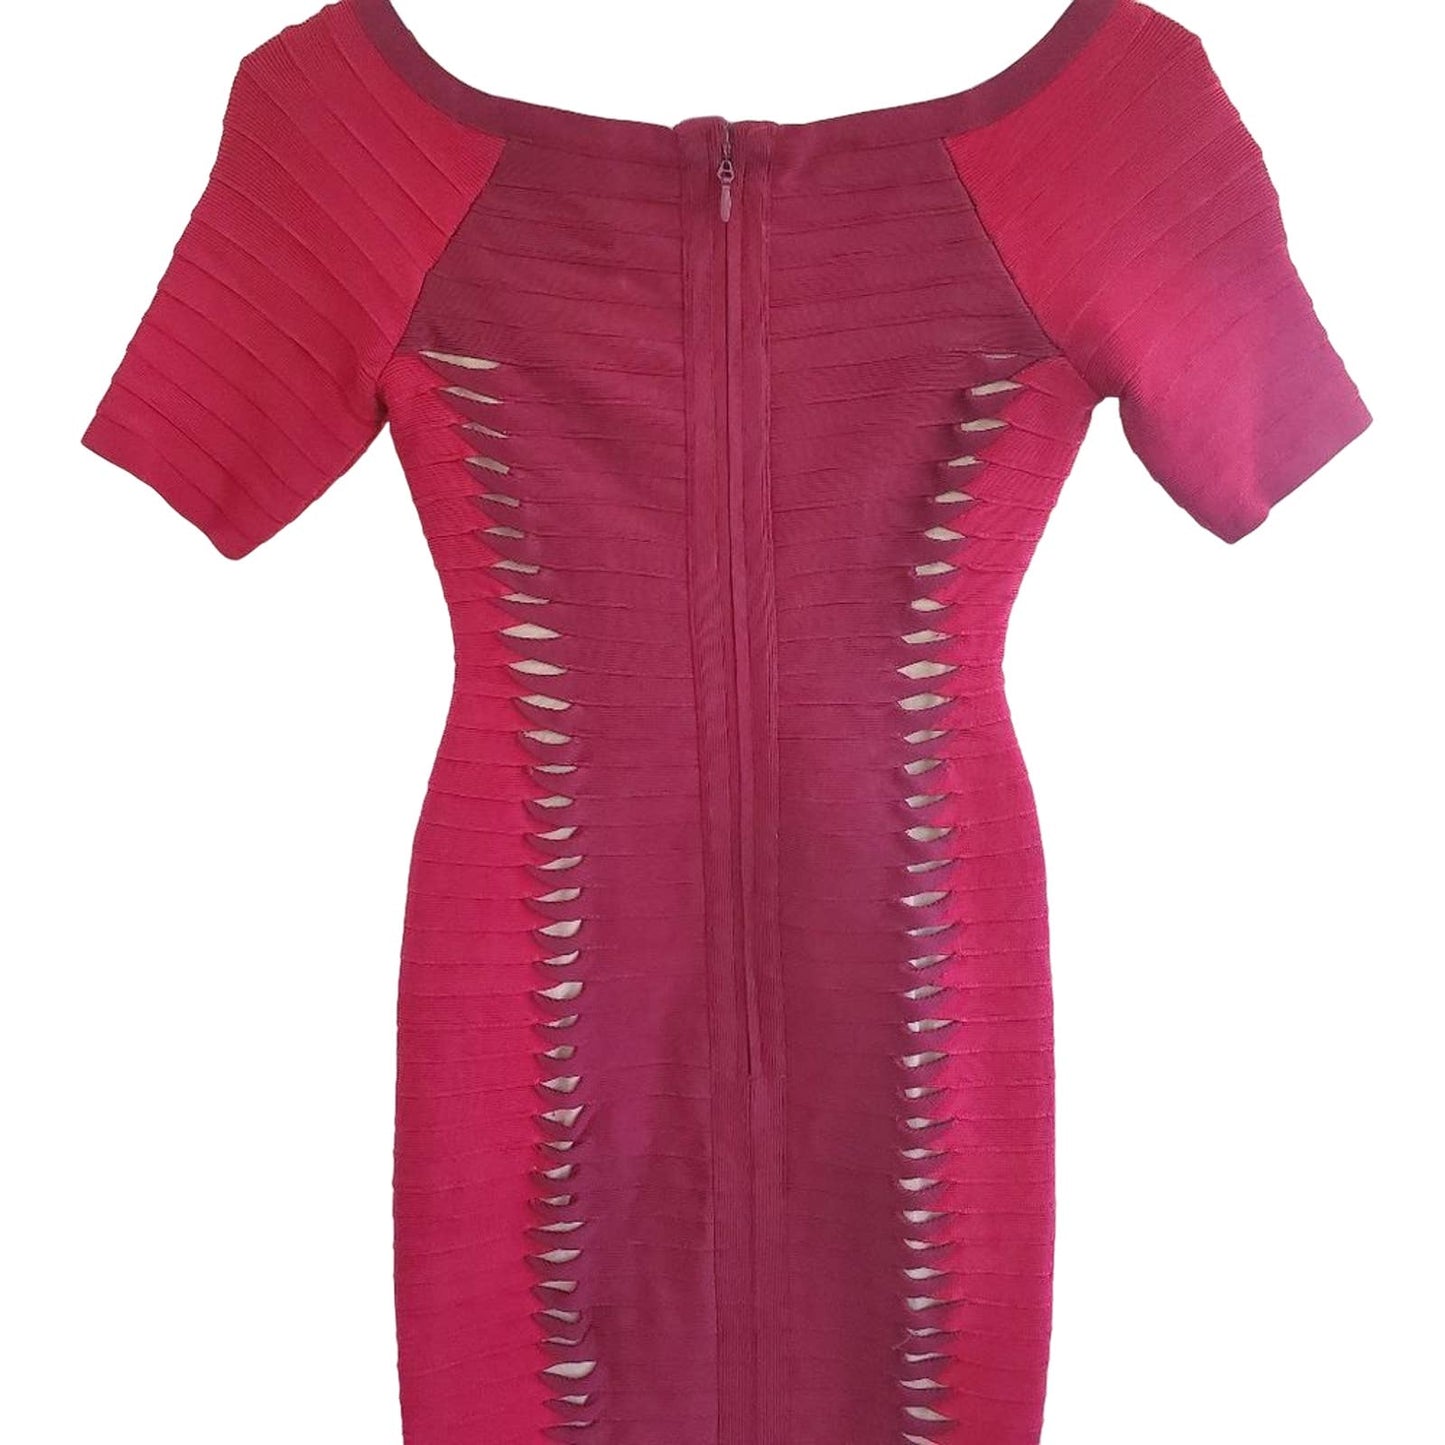 HERVE LEGER Red Short Sleeve Bodycon Bandage Scoop Neck Dress, Size X-Small